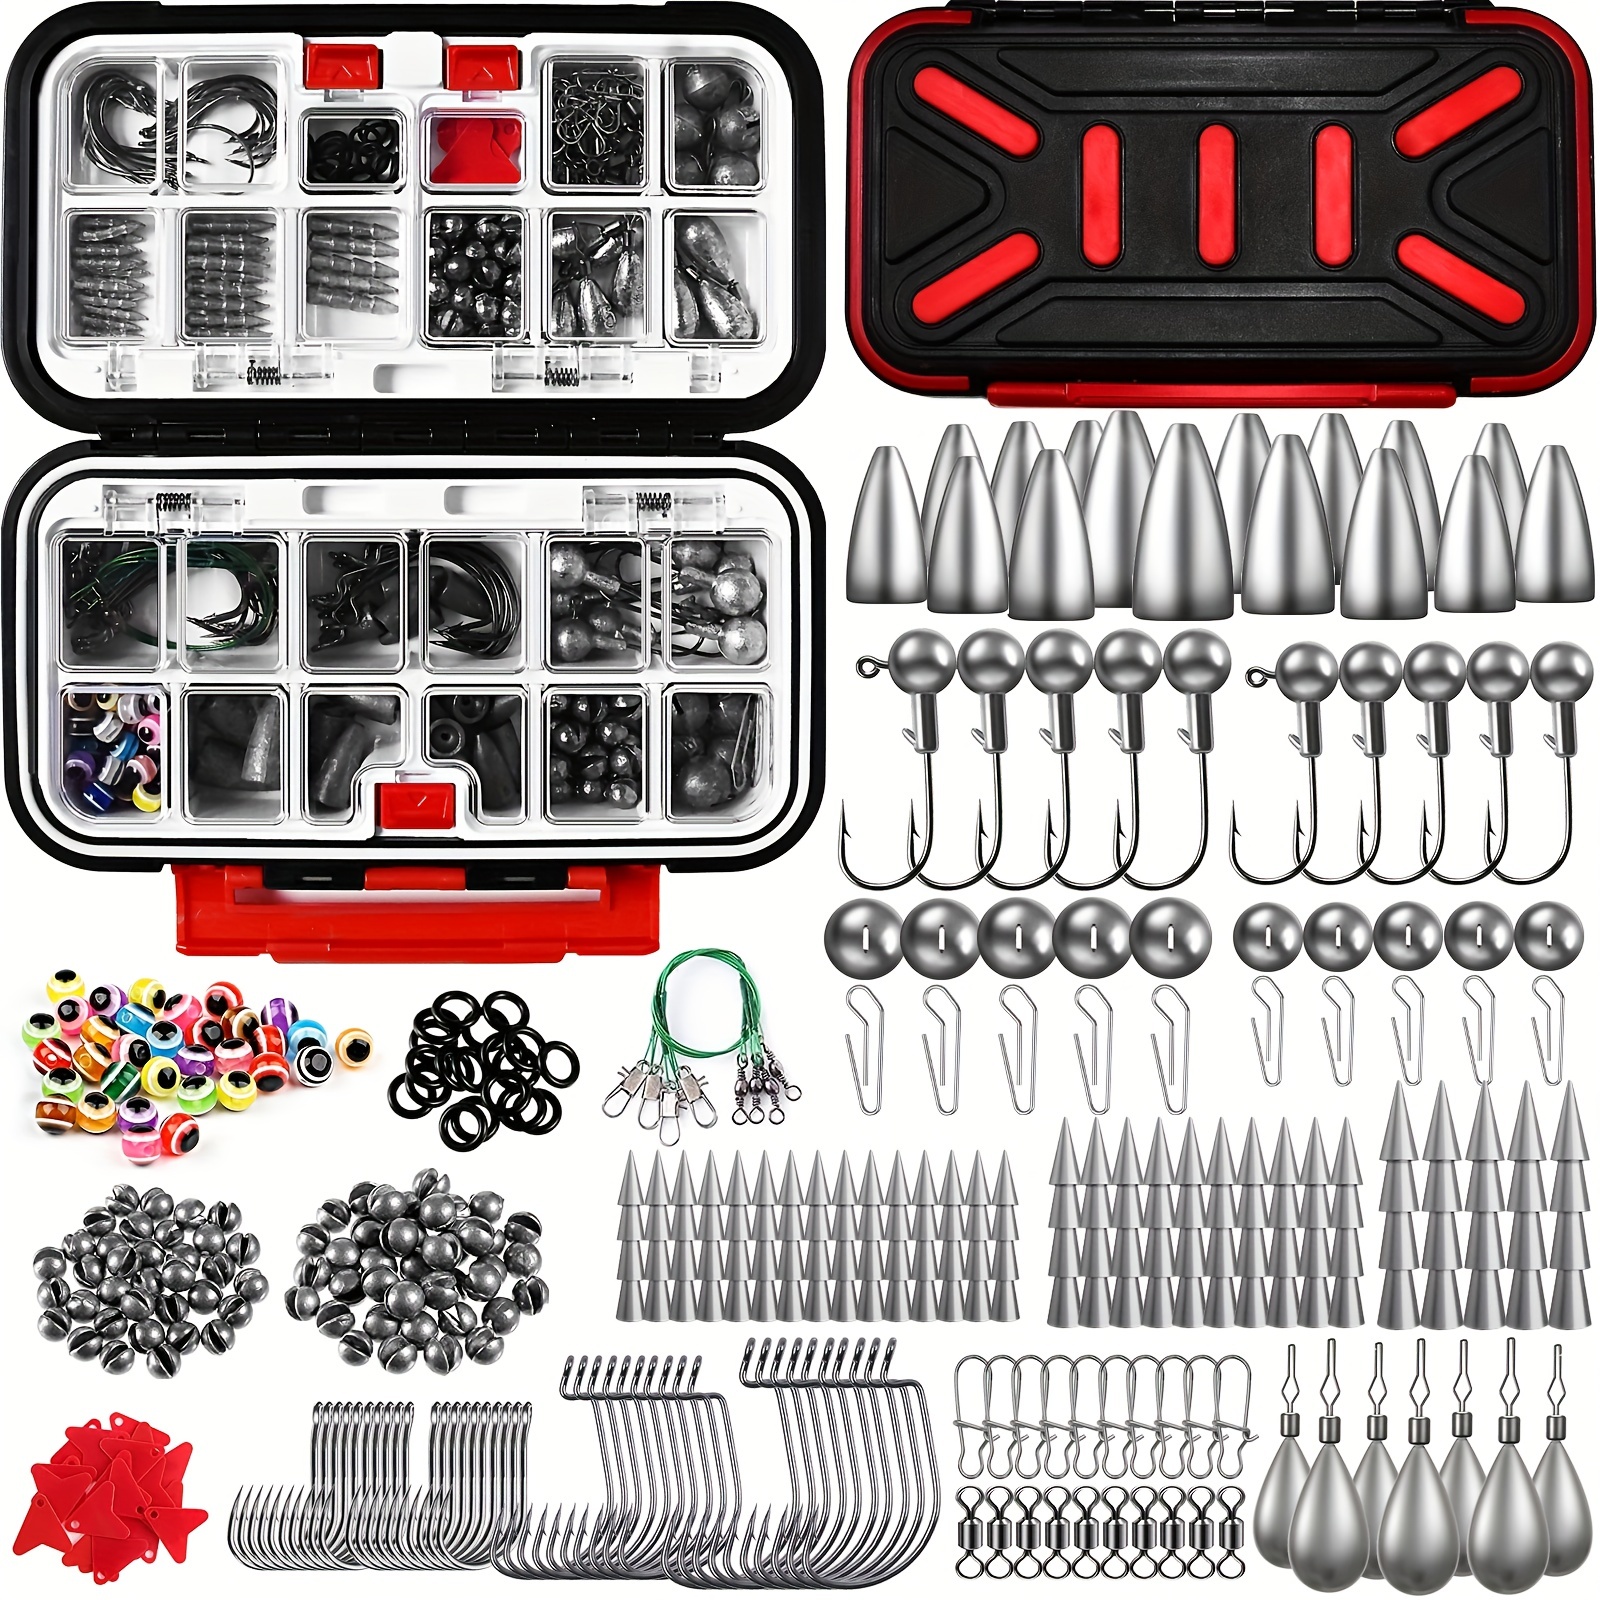 

208pcs/268pcs Complete Fishing Tackle Set With Hooks, Weights, Spinner Blade, And Lures - Perfect For Bass, Bluegill, And Crappie - Includes Convenient Storage Box